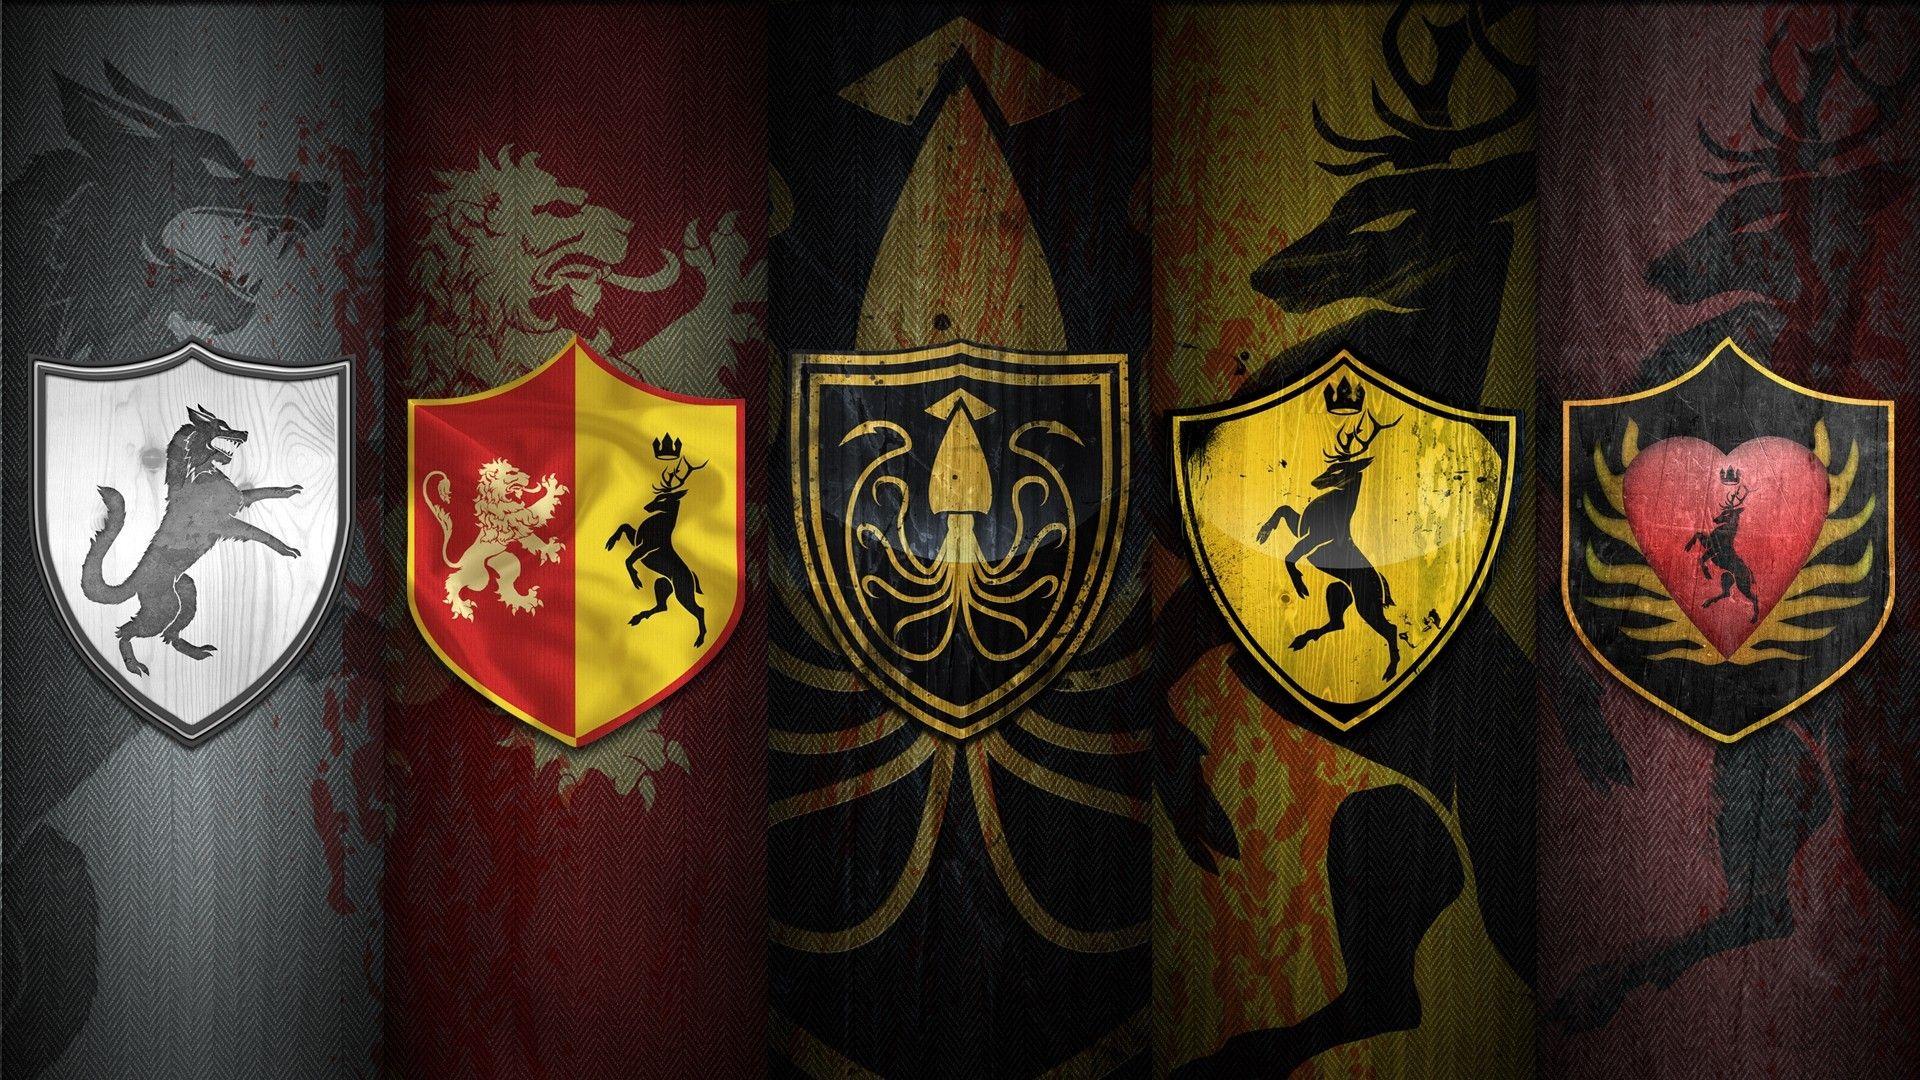 Game of Thrones Sigil Wallpaper Free Game of Thrones